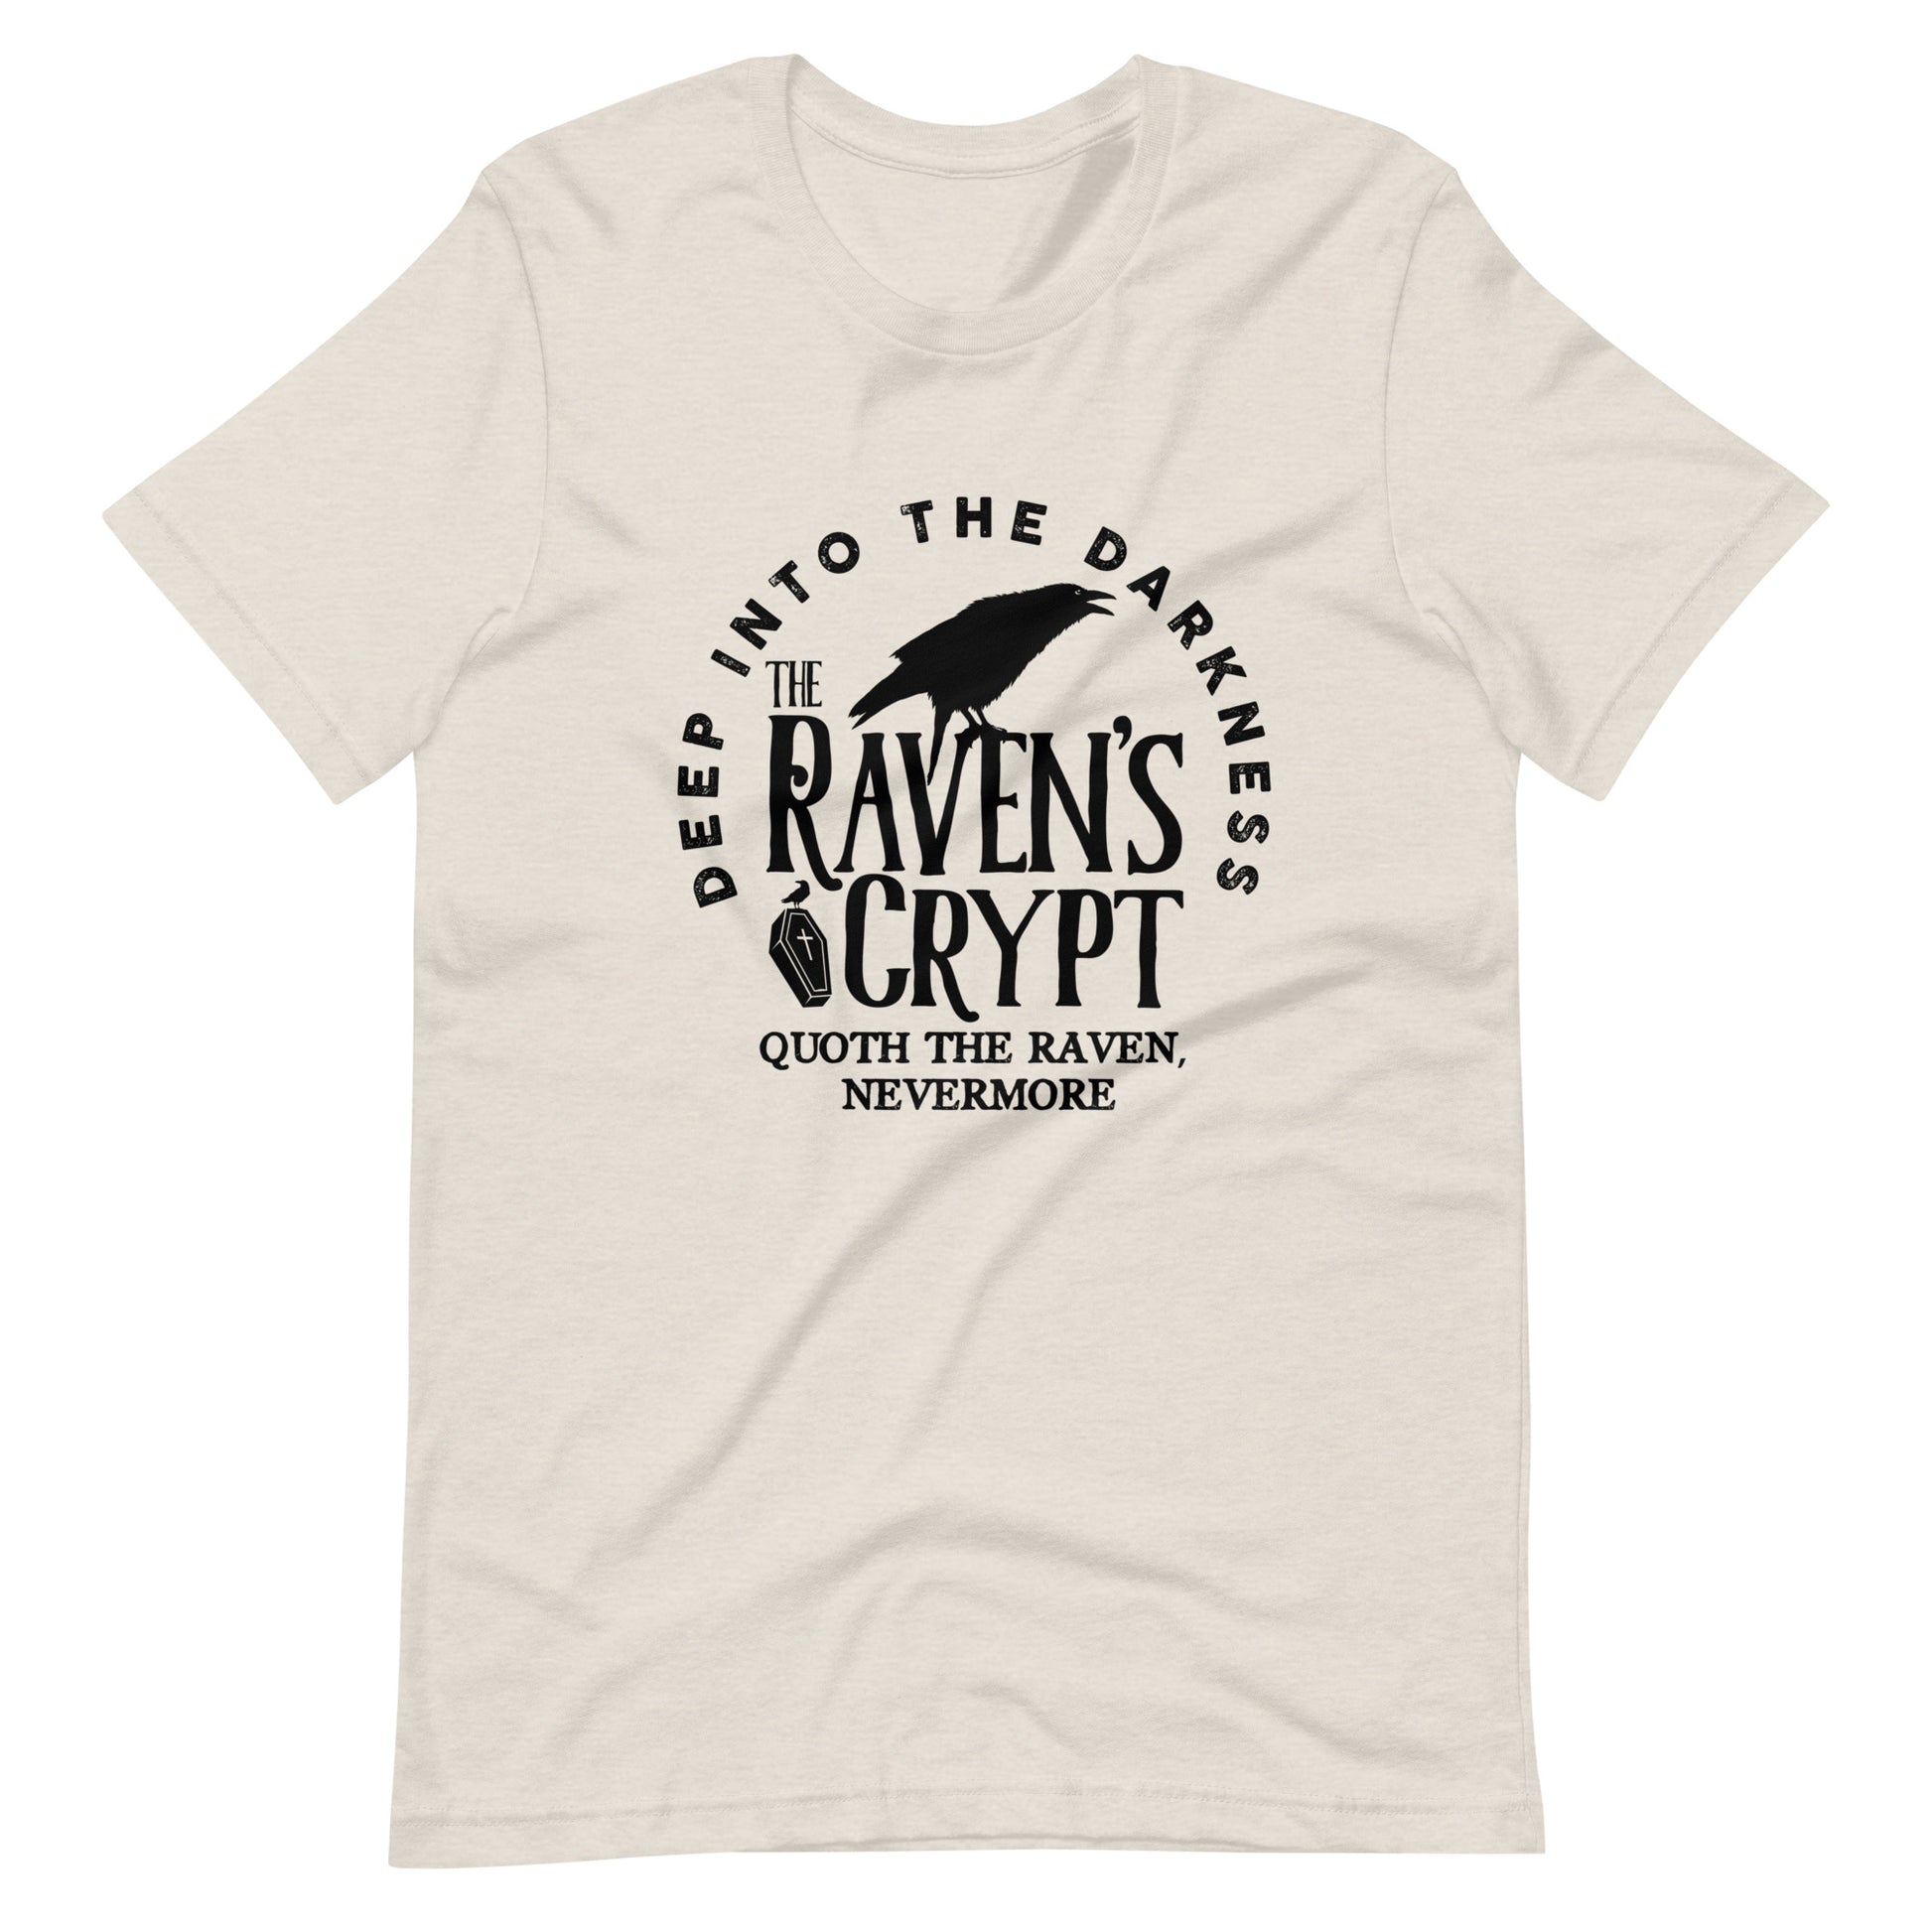 Deep Into the Darkness The Raven's Crypt - Men's t-shirt - Heather Dust Front